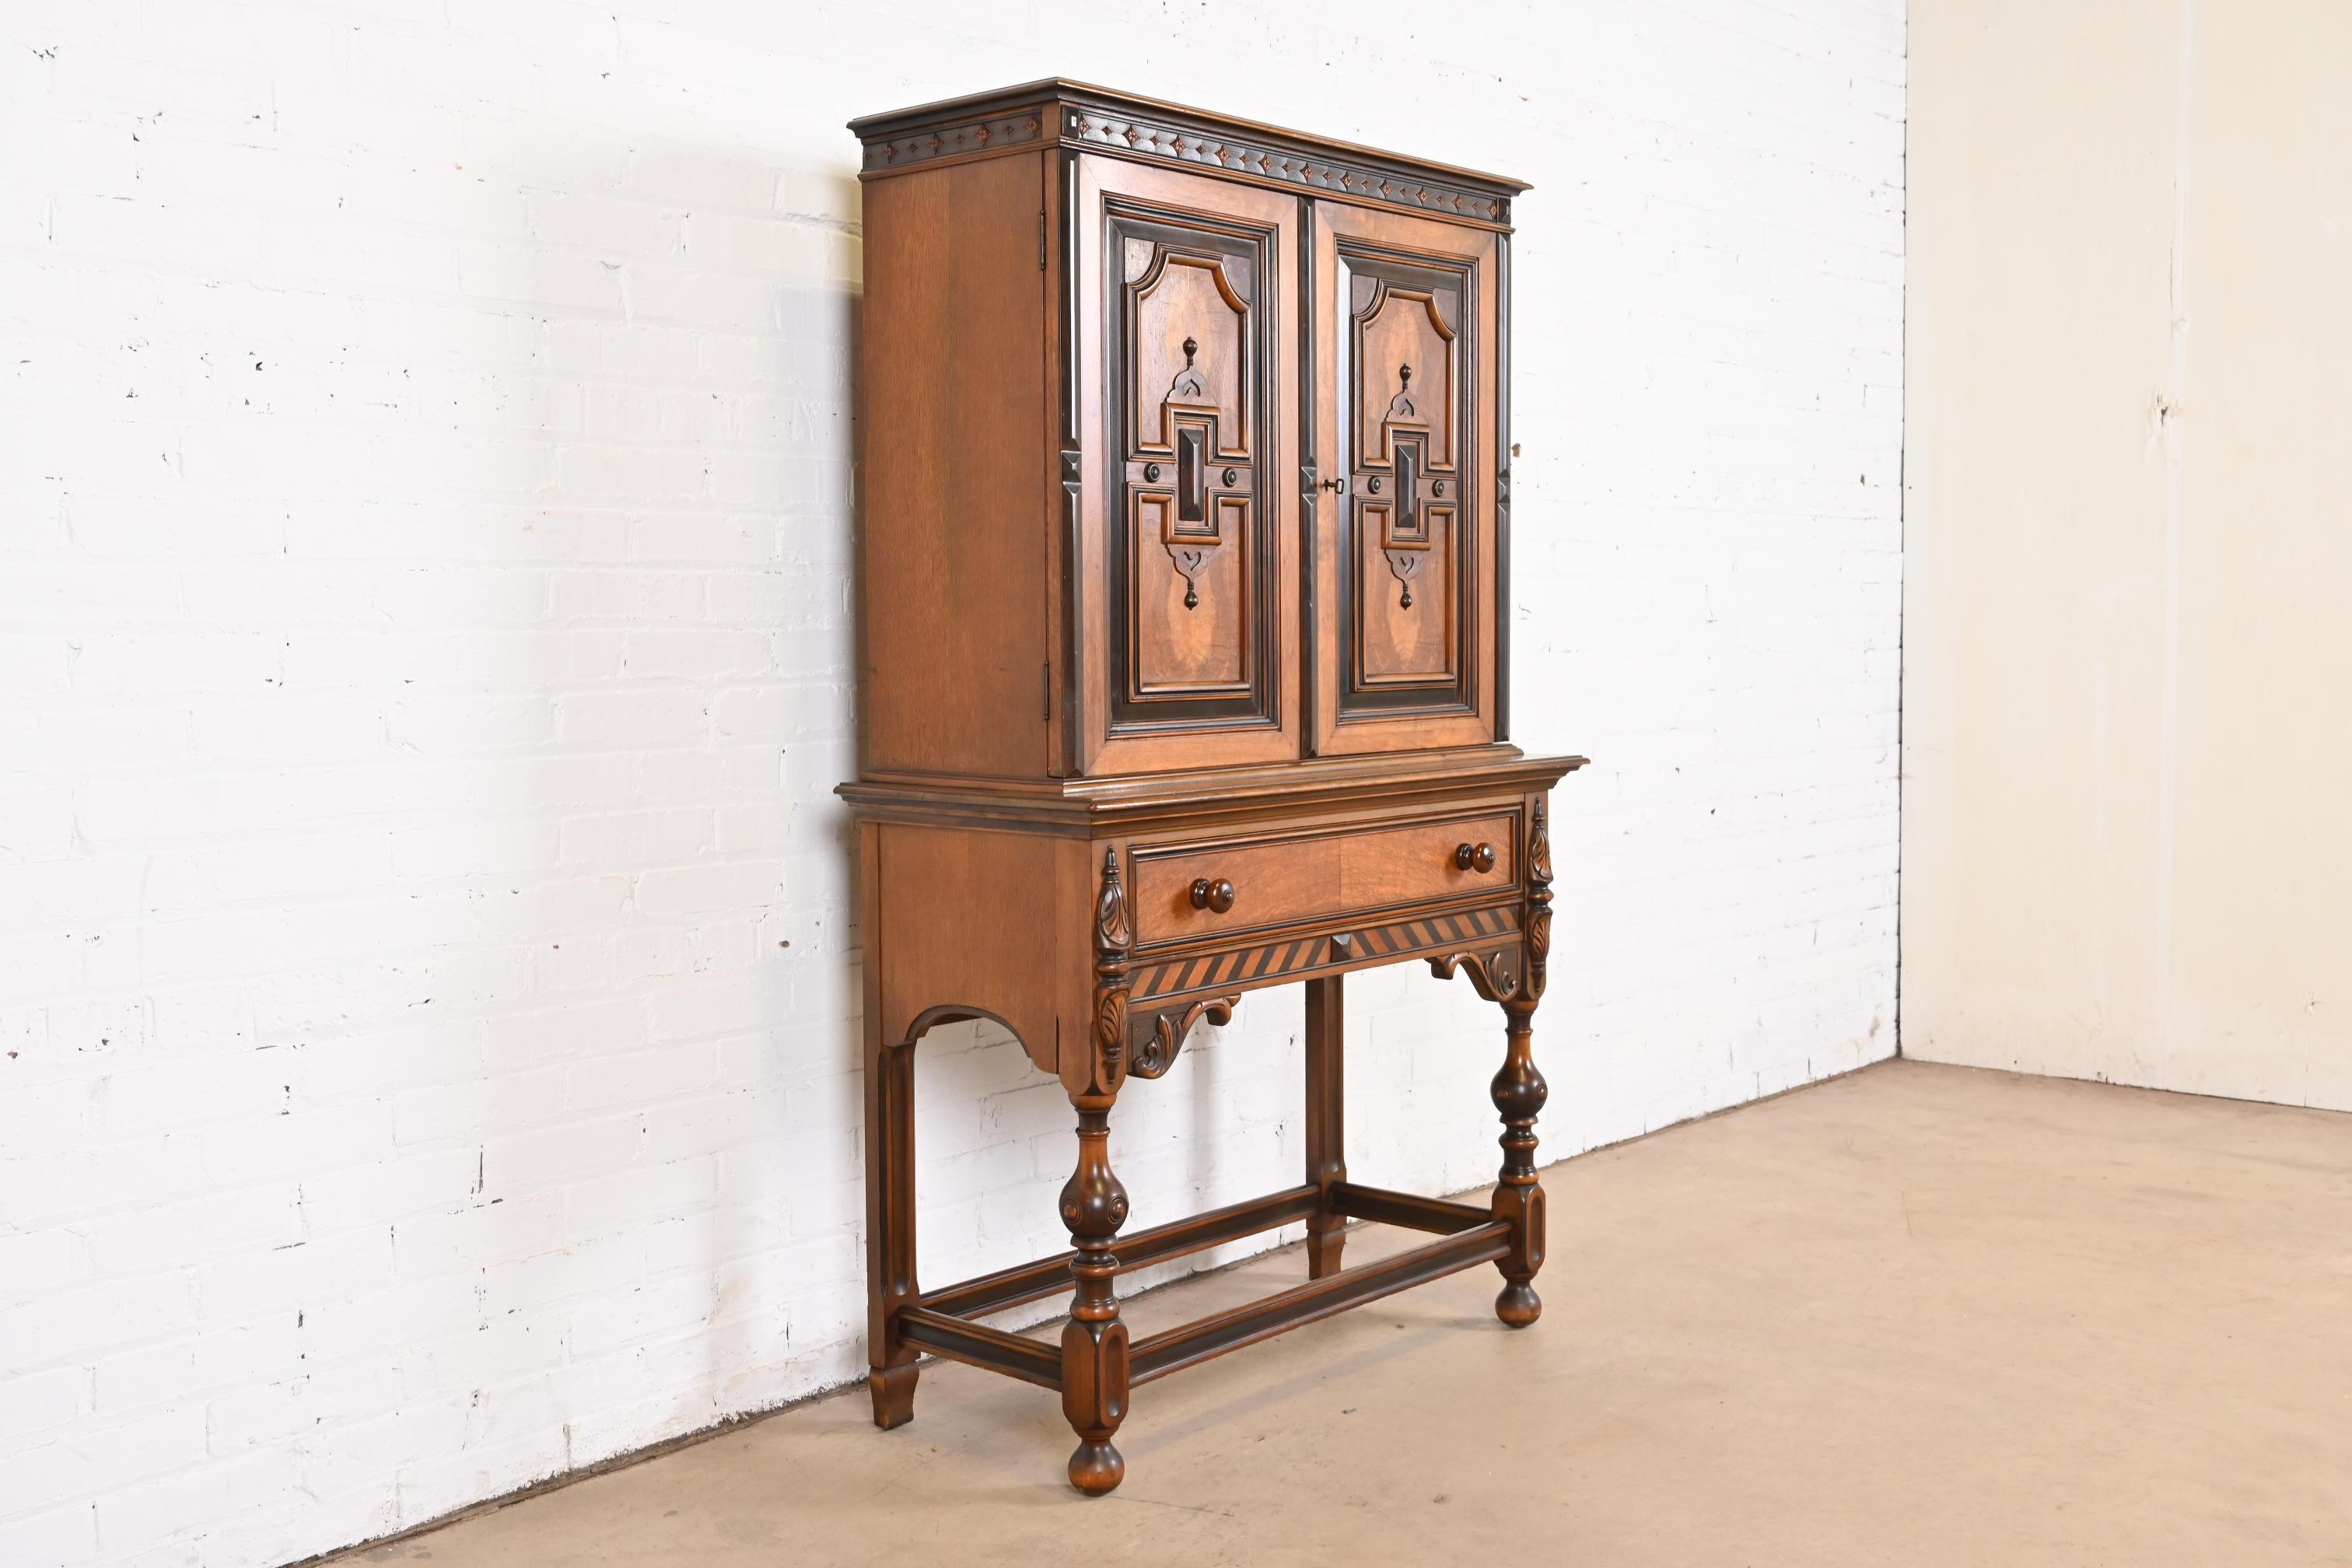 Berkey & Gay English Jacobean Walnut and Burl Wood Bookcase or Bar Cabinet In Good Condition For Sale In South Bend, IN